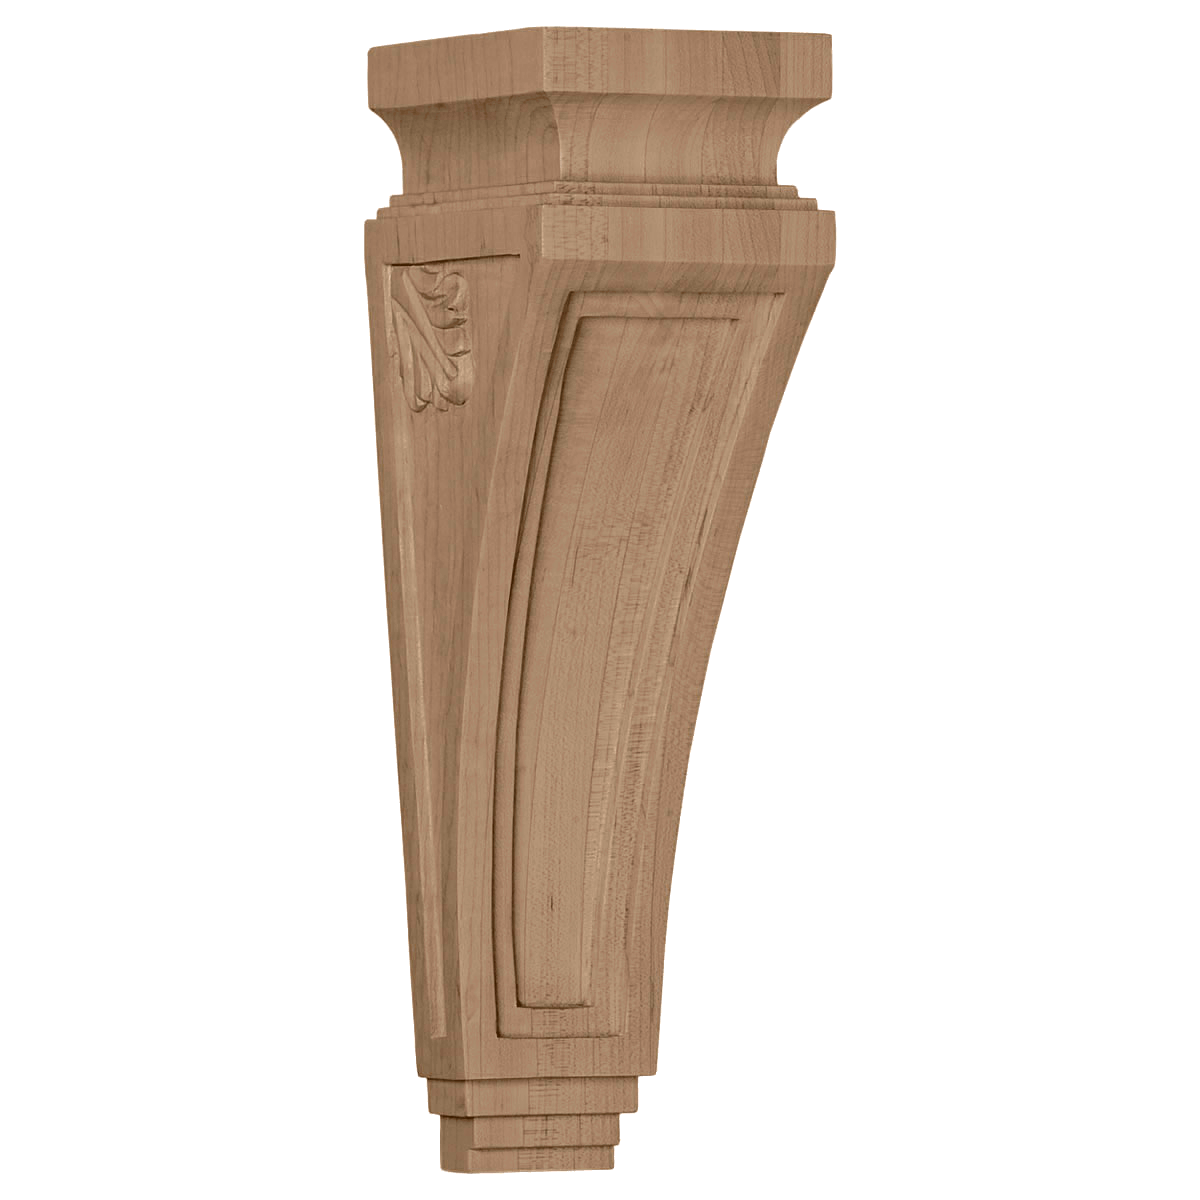 COR03X04X14AR Extra Small Arts and Crafts Corbel 3 7/8"W x 4 1/2"D x 14"H